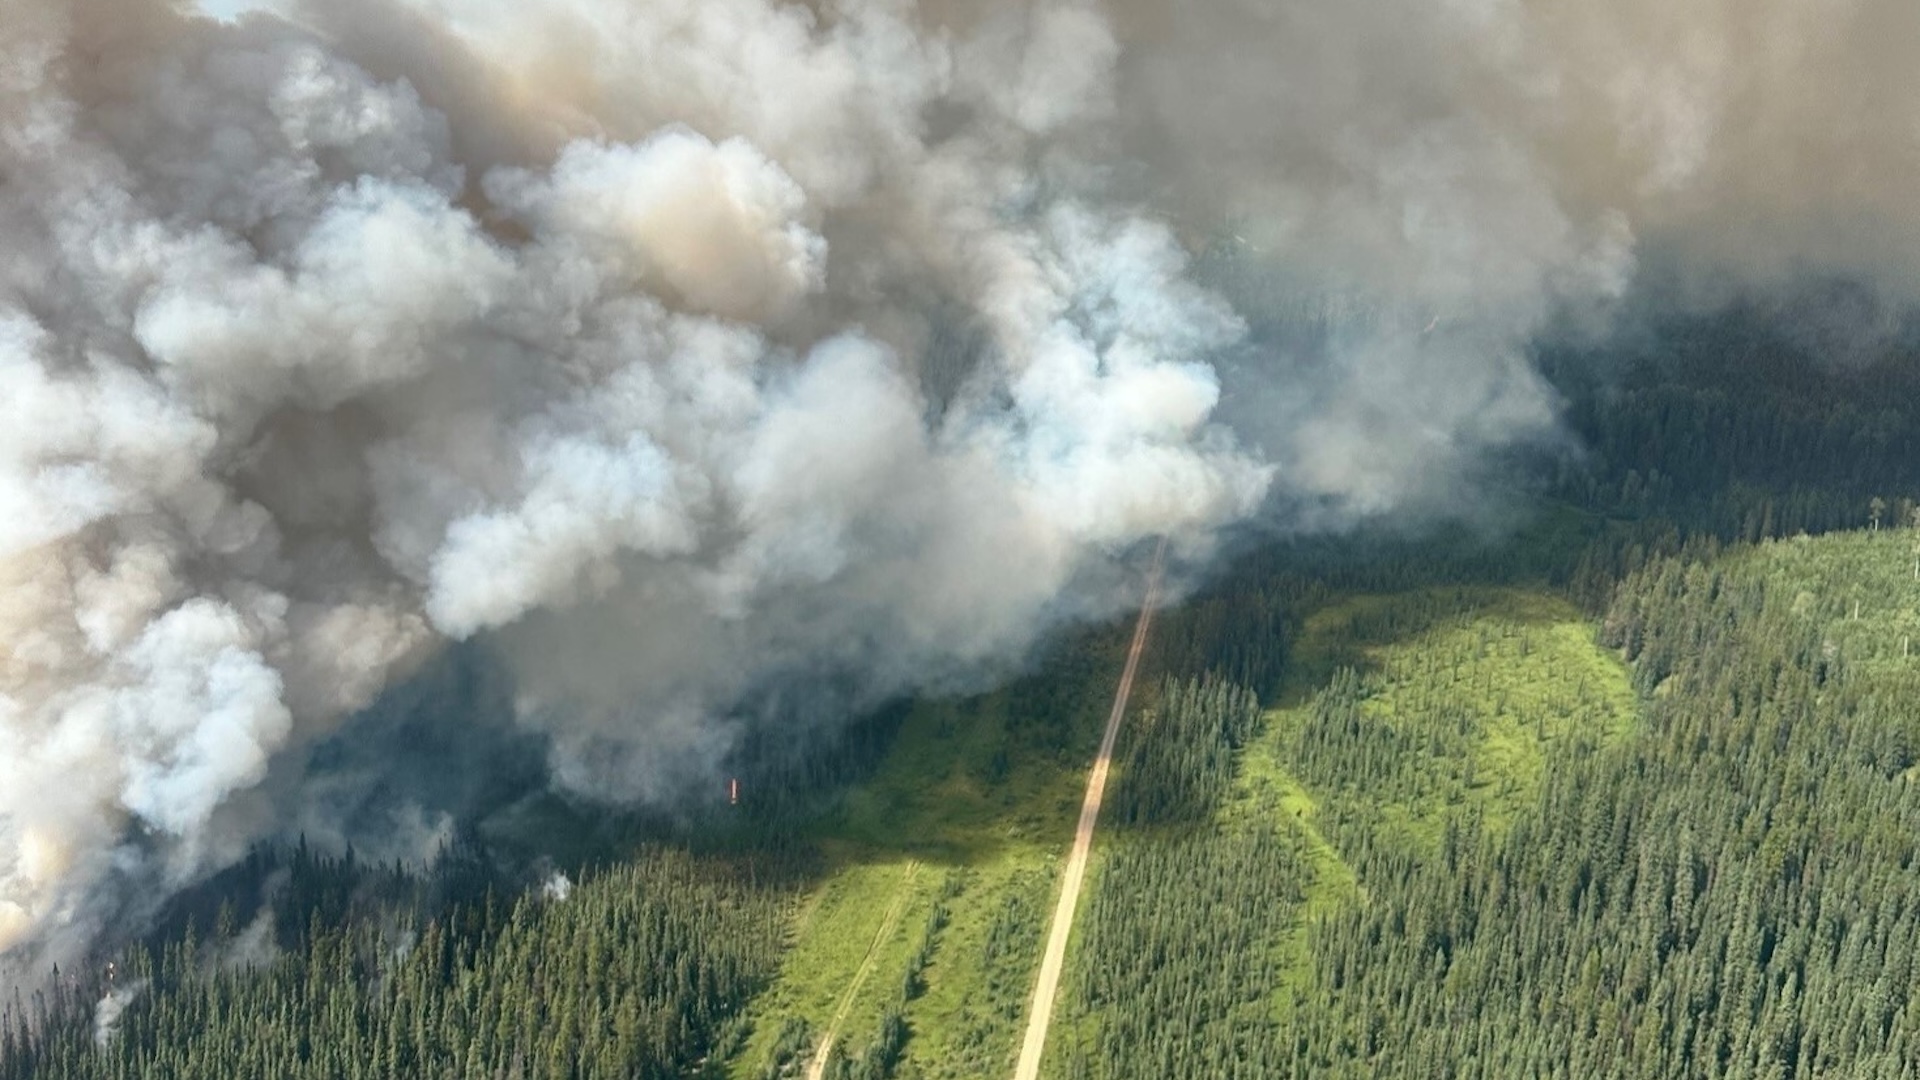 ‘Wall of flames’ from out-of-control Canadian wildfire devastates town of Jasper and national park